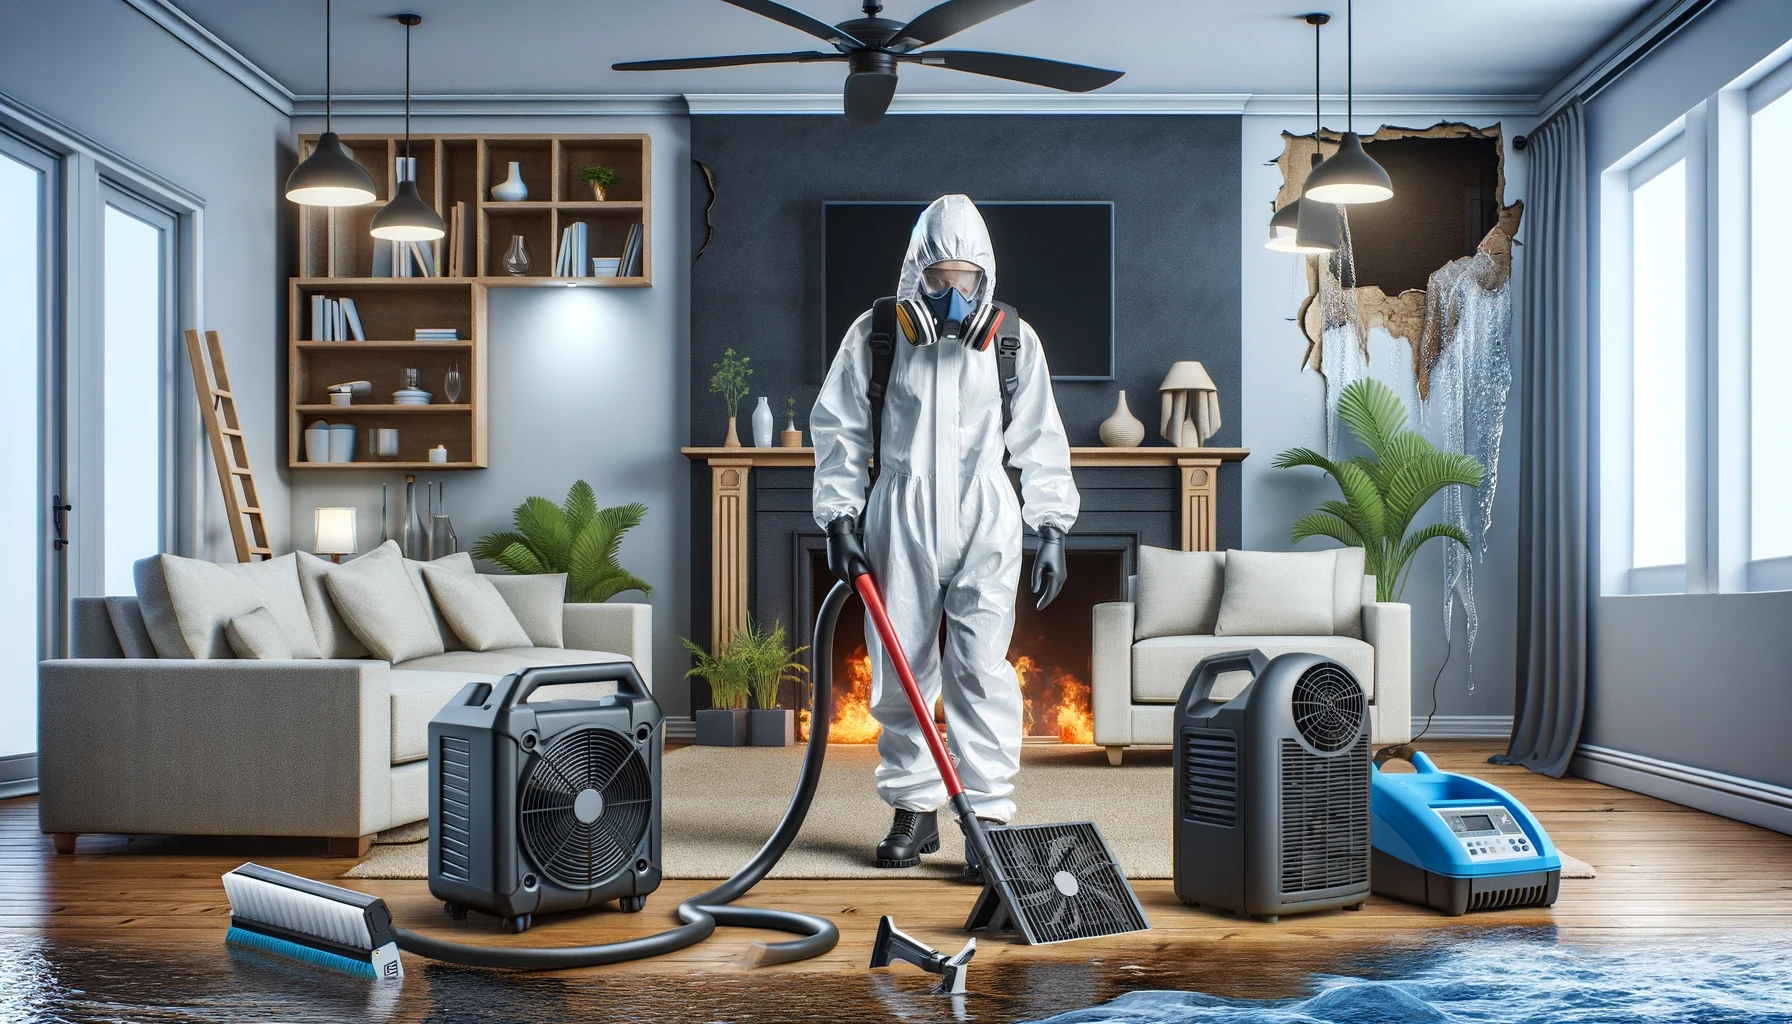 Realistic banner image for a blog about water damage restoration tips, showing a professional in protective gear restoring a home affected by water